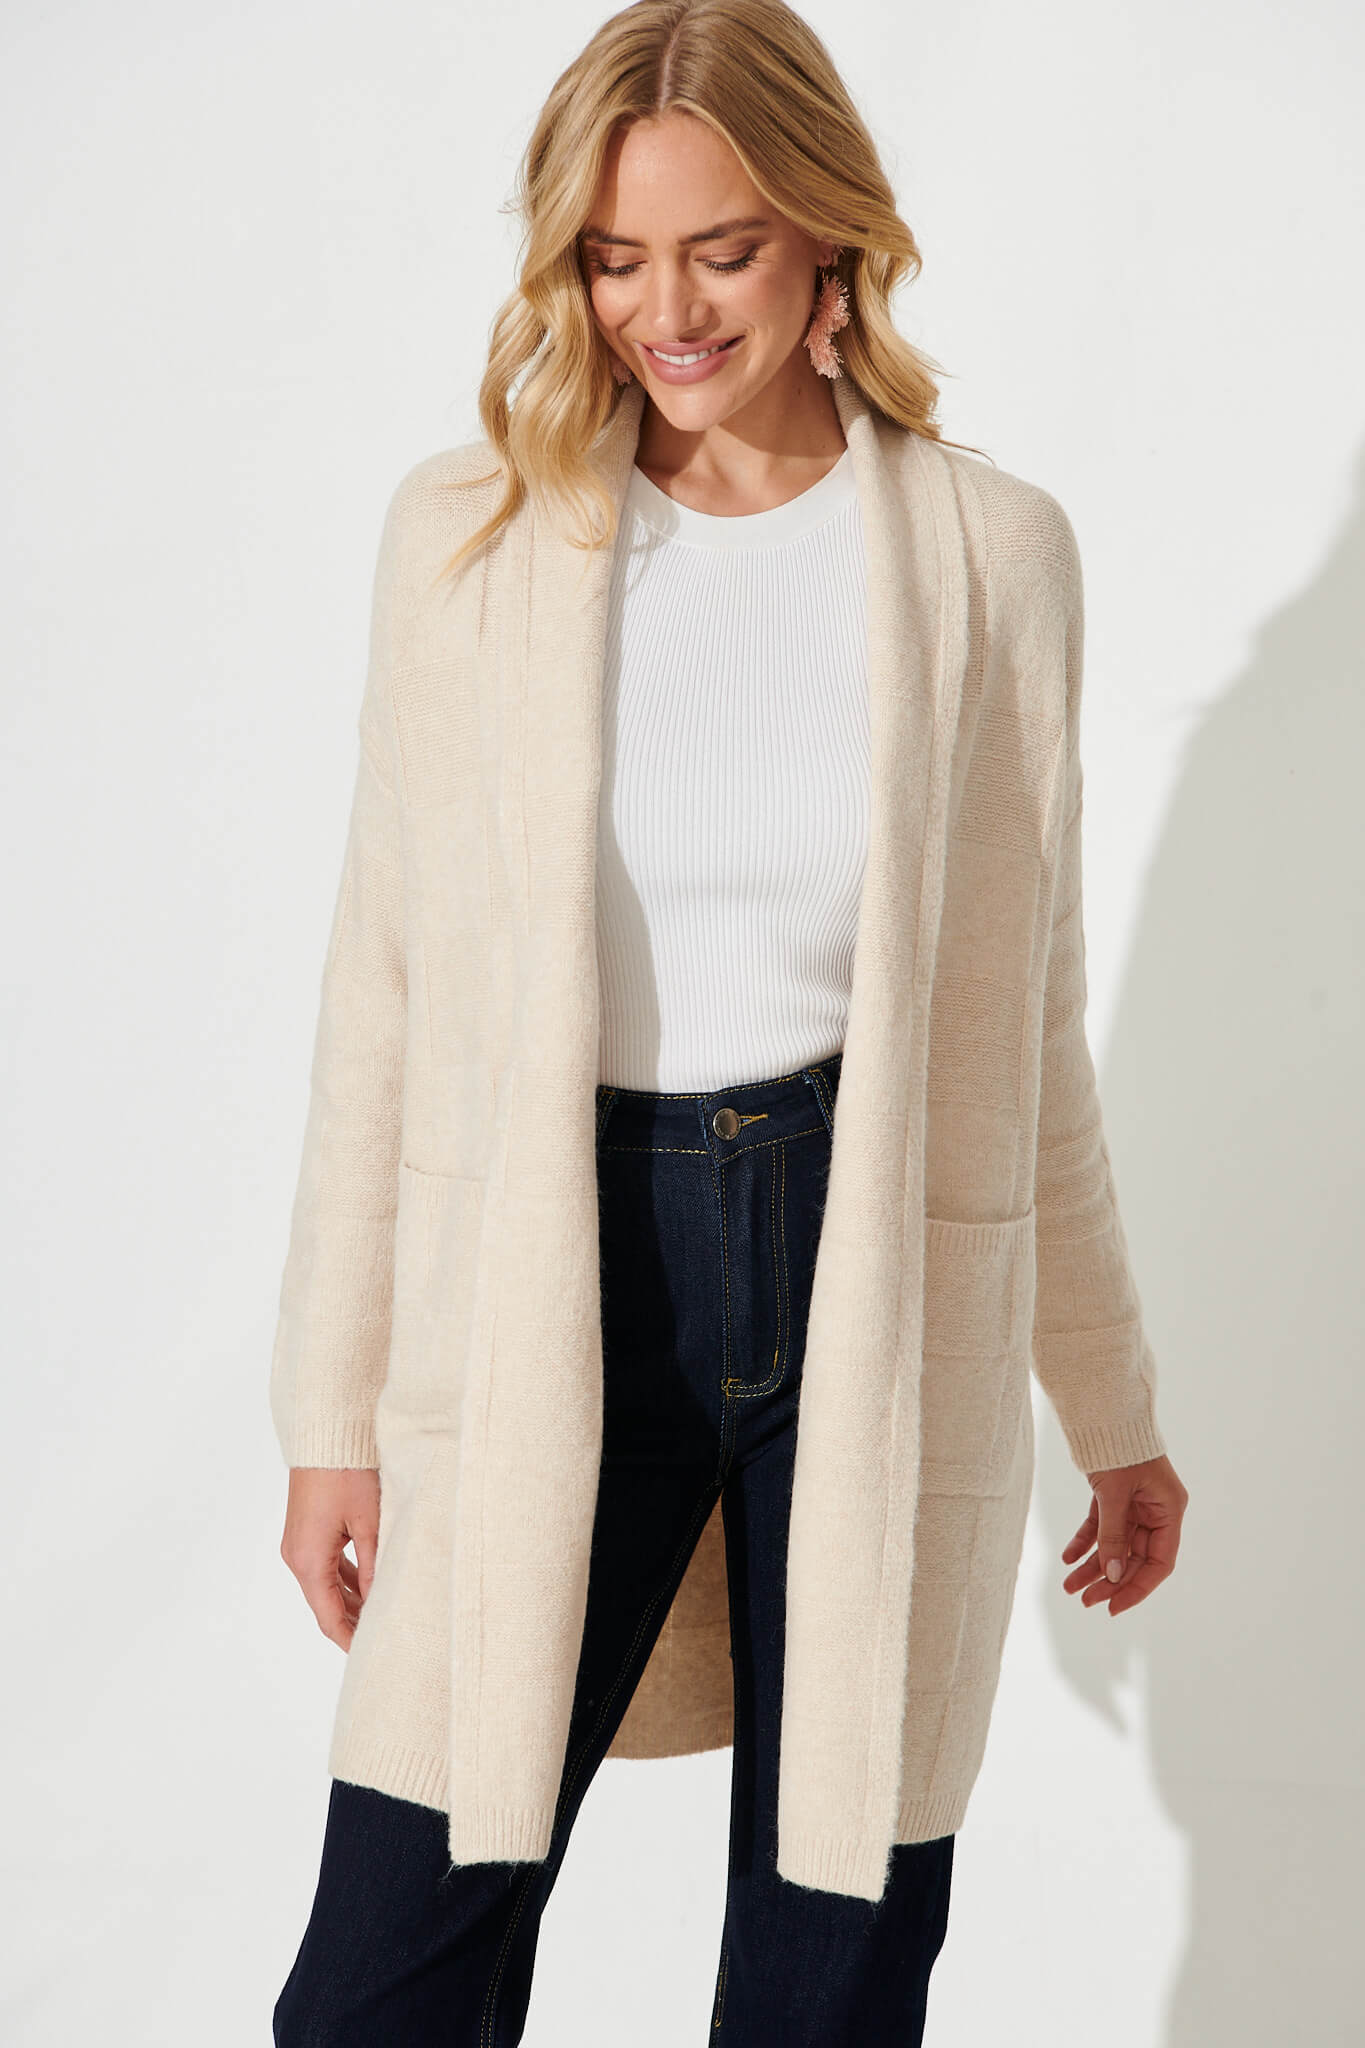 Saturn Knit Cardigan In Cream Wool Blend - front